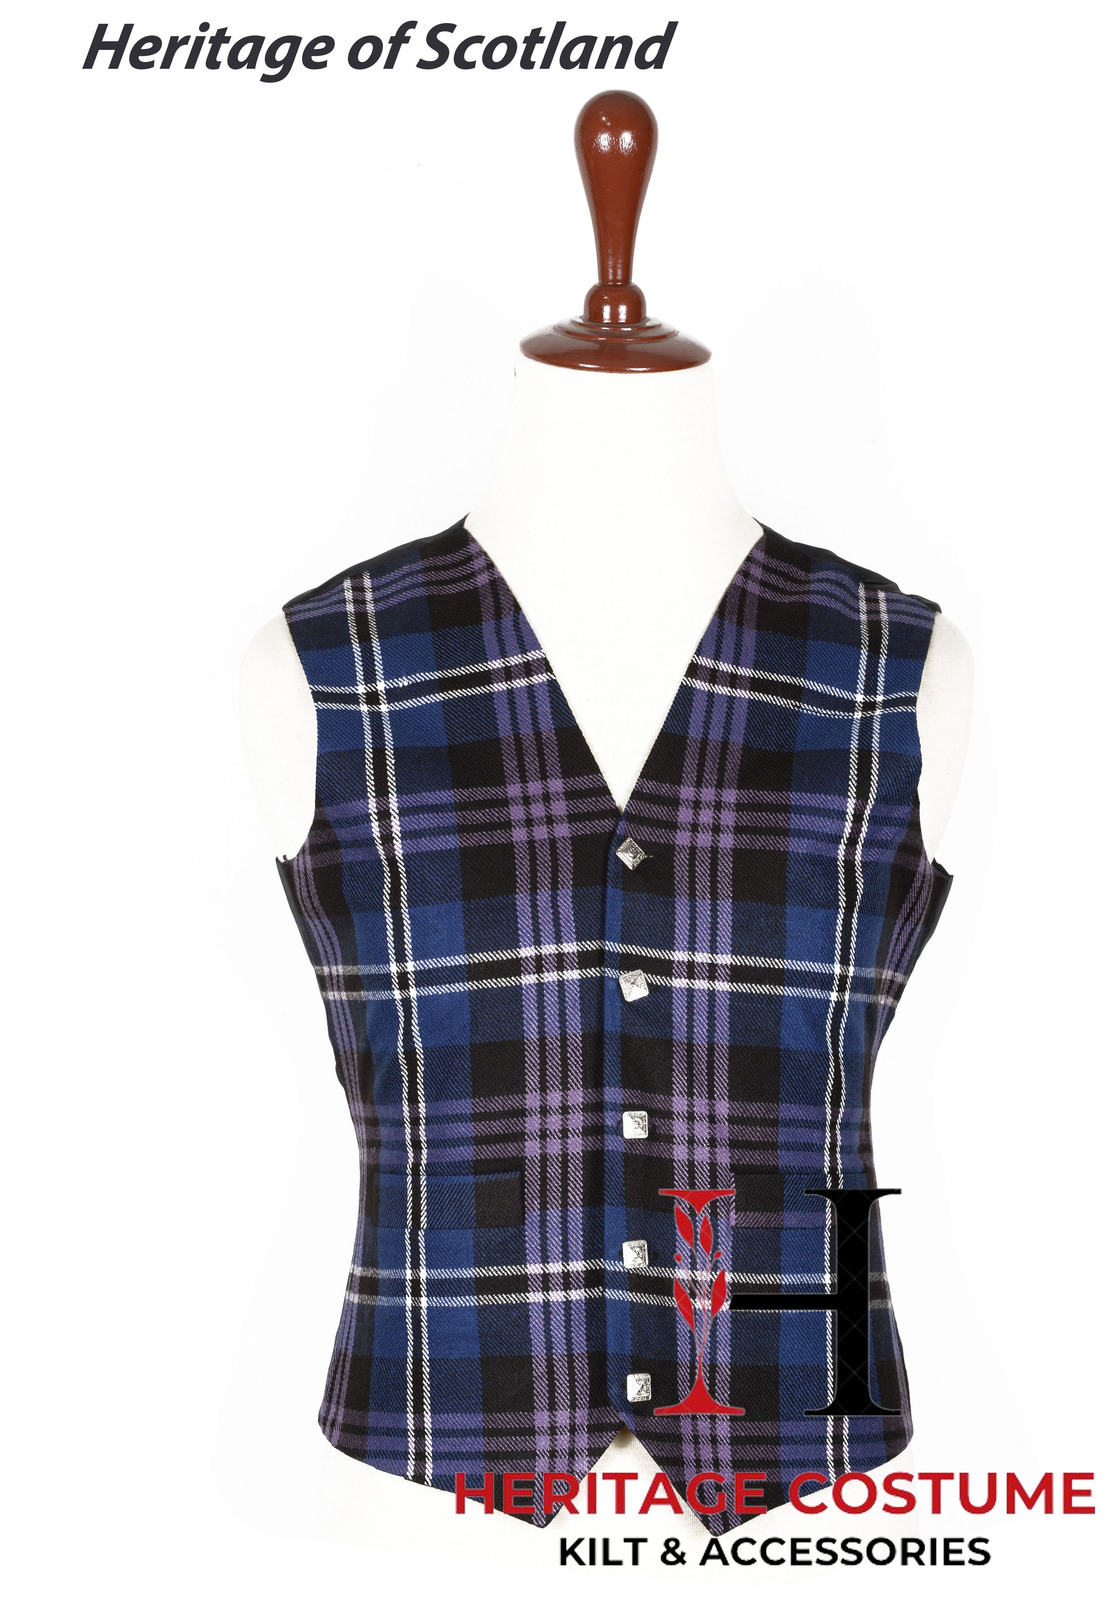 Primary image for Heritage of Scotland Tartan VEST 5 Buttons Scottish Formal Weeding WAISTCOAT